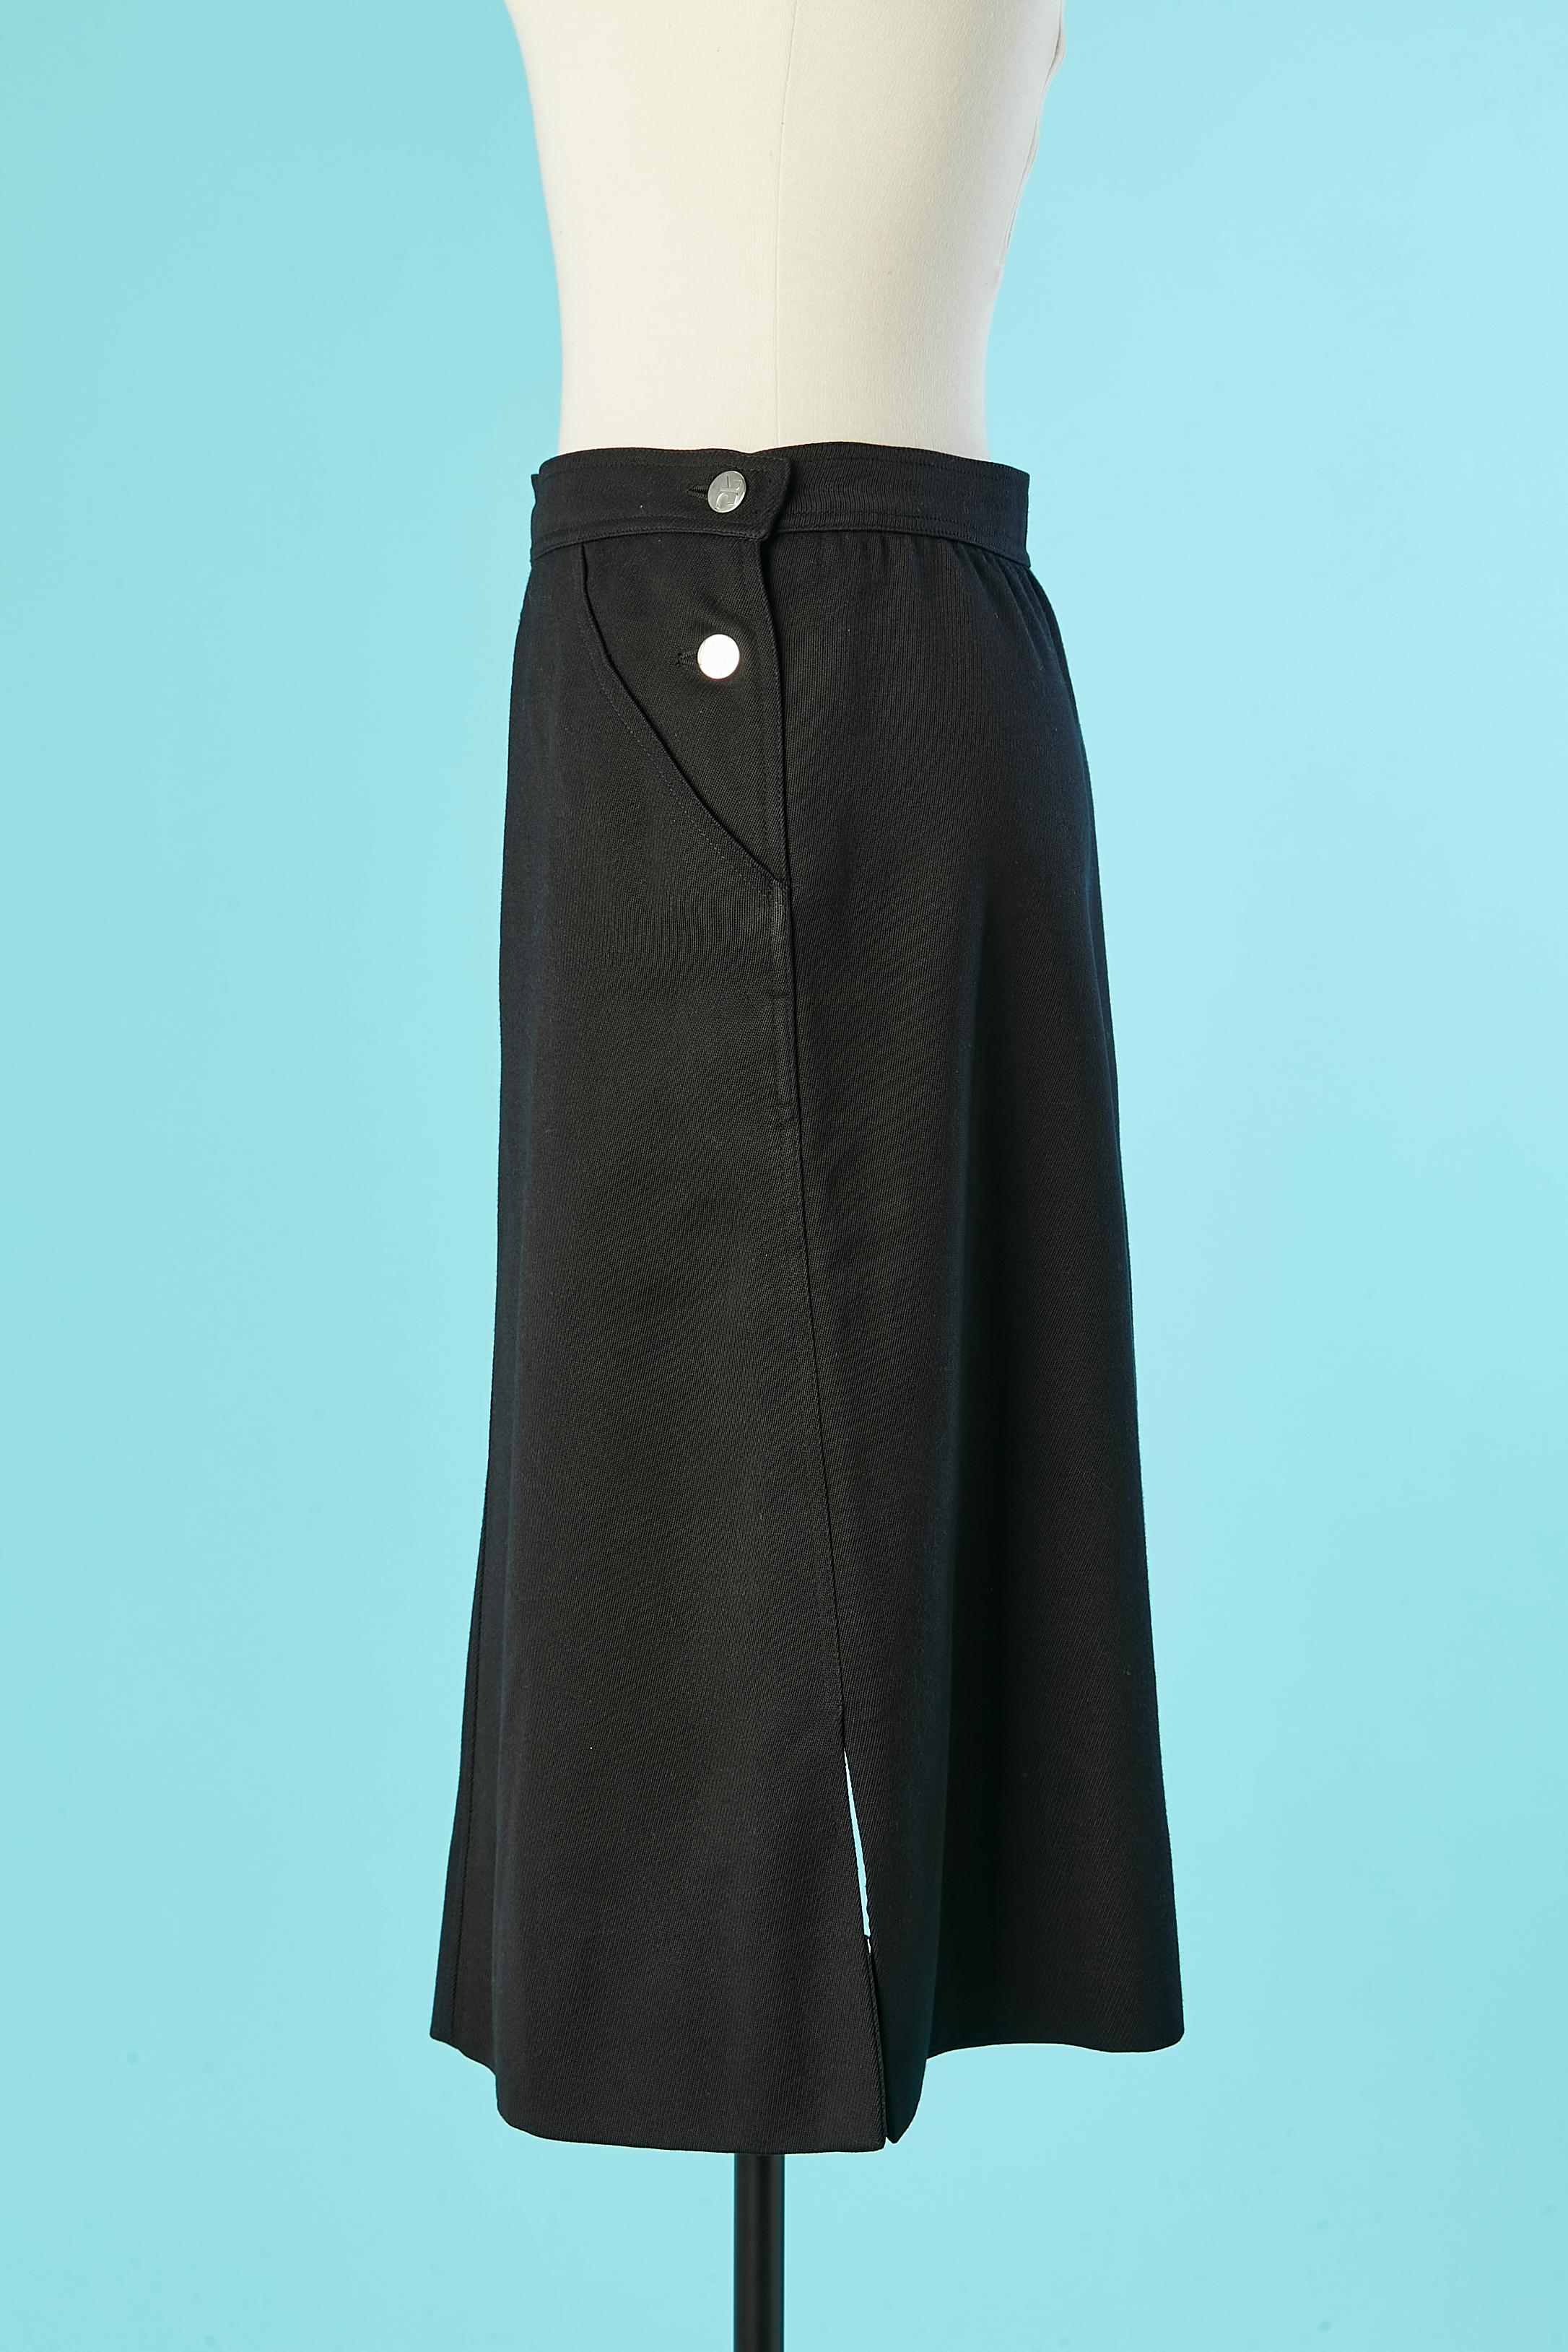 Women's Black A-line skirt with branded button Courrèges Circa 1970's  For Sale